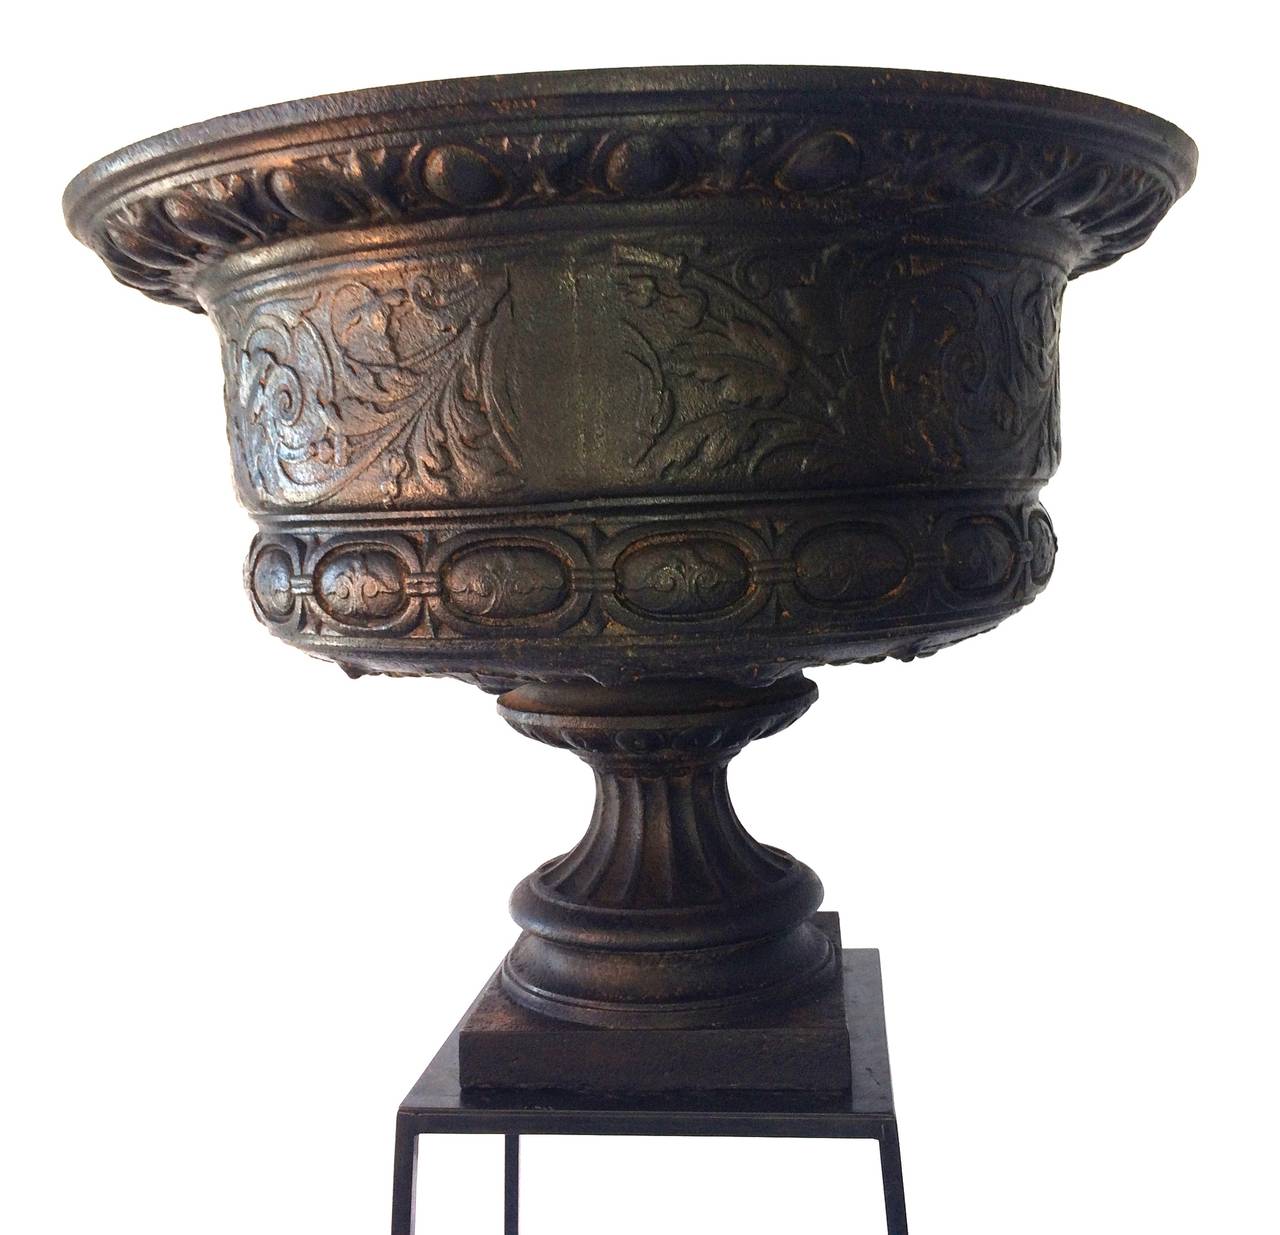 Most extraordinary pair of 1860s English cast iron urns with architectural stands. 
Cast iron urns: 28